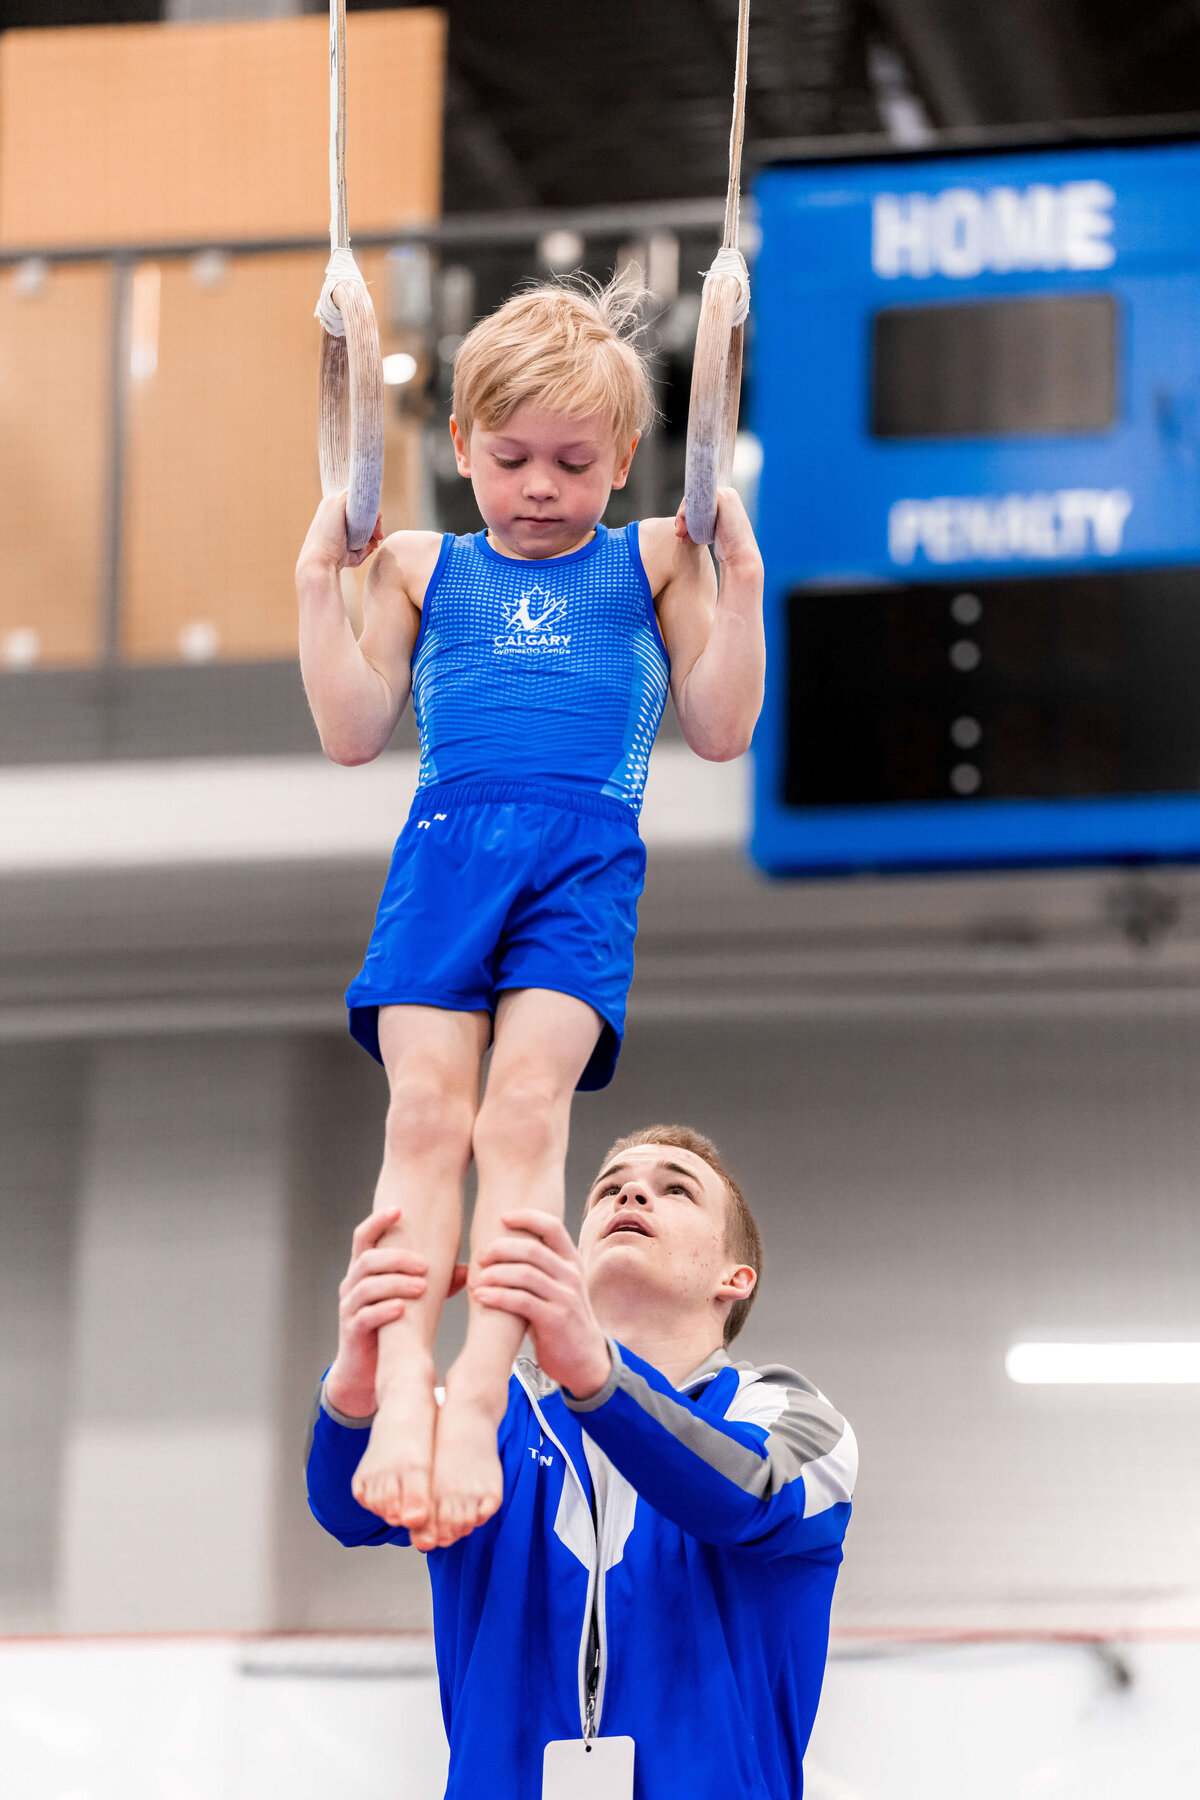 Photo by Luke O'Geil taken at the 2023 inaugural Grizzly Classic men's artistic gymnastics competitionA1_06147